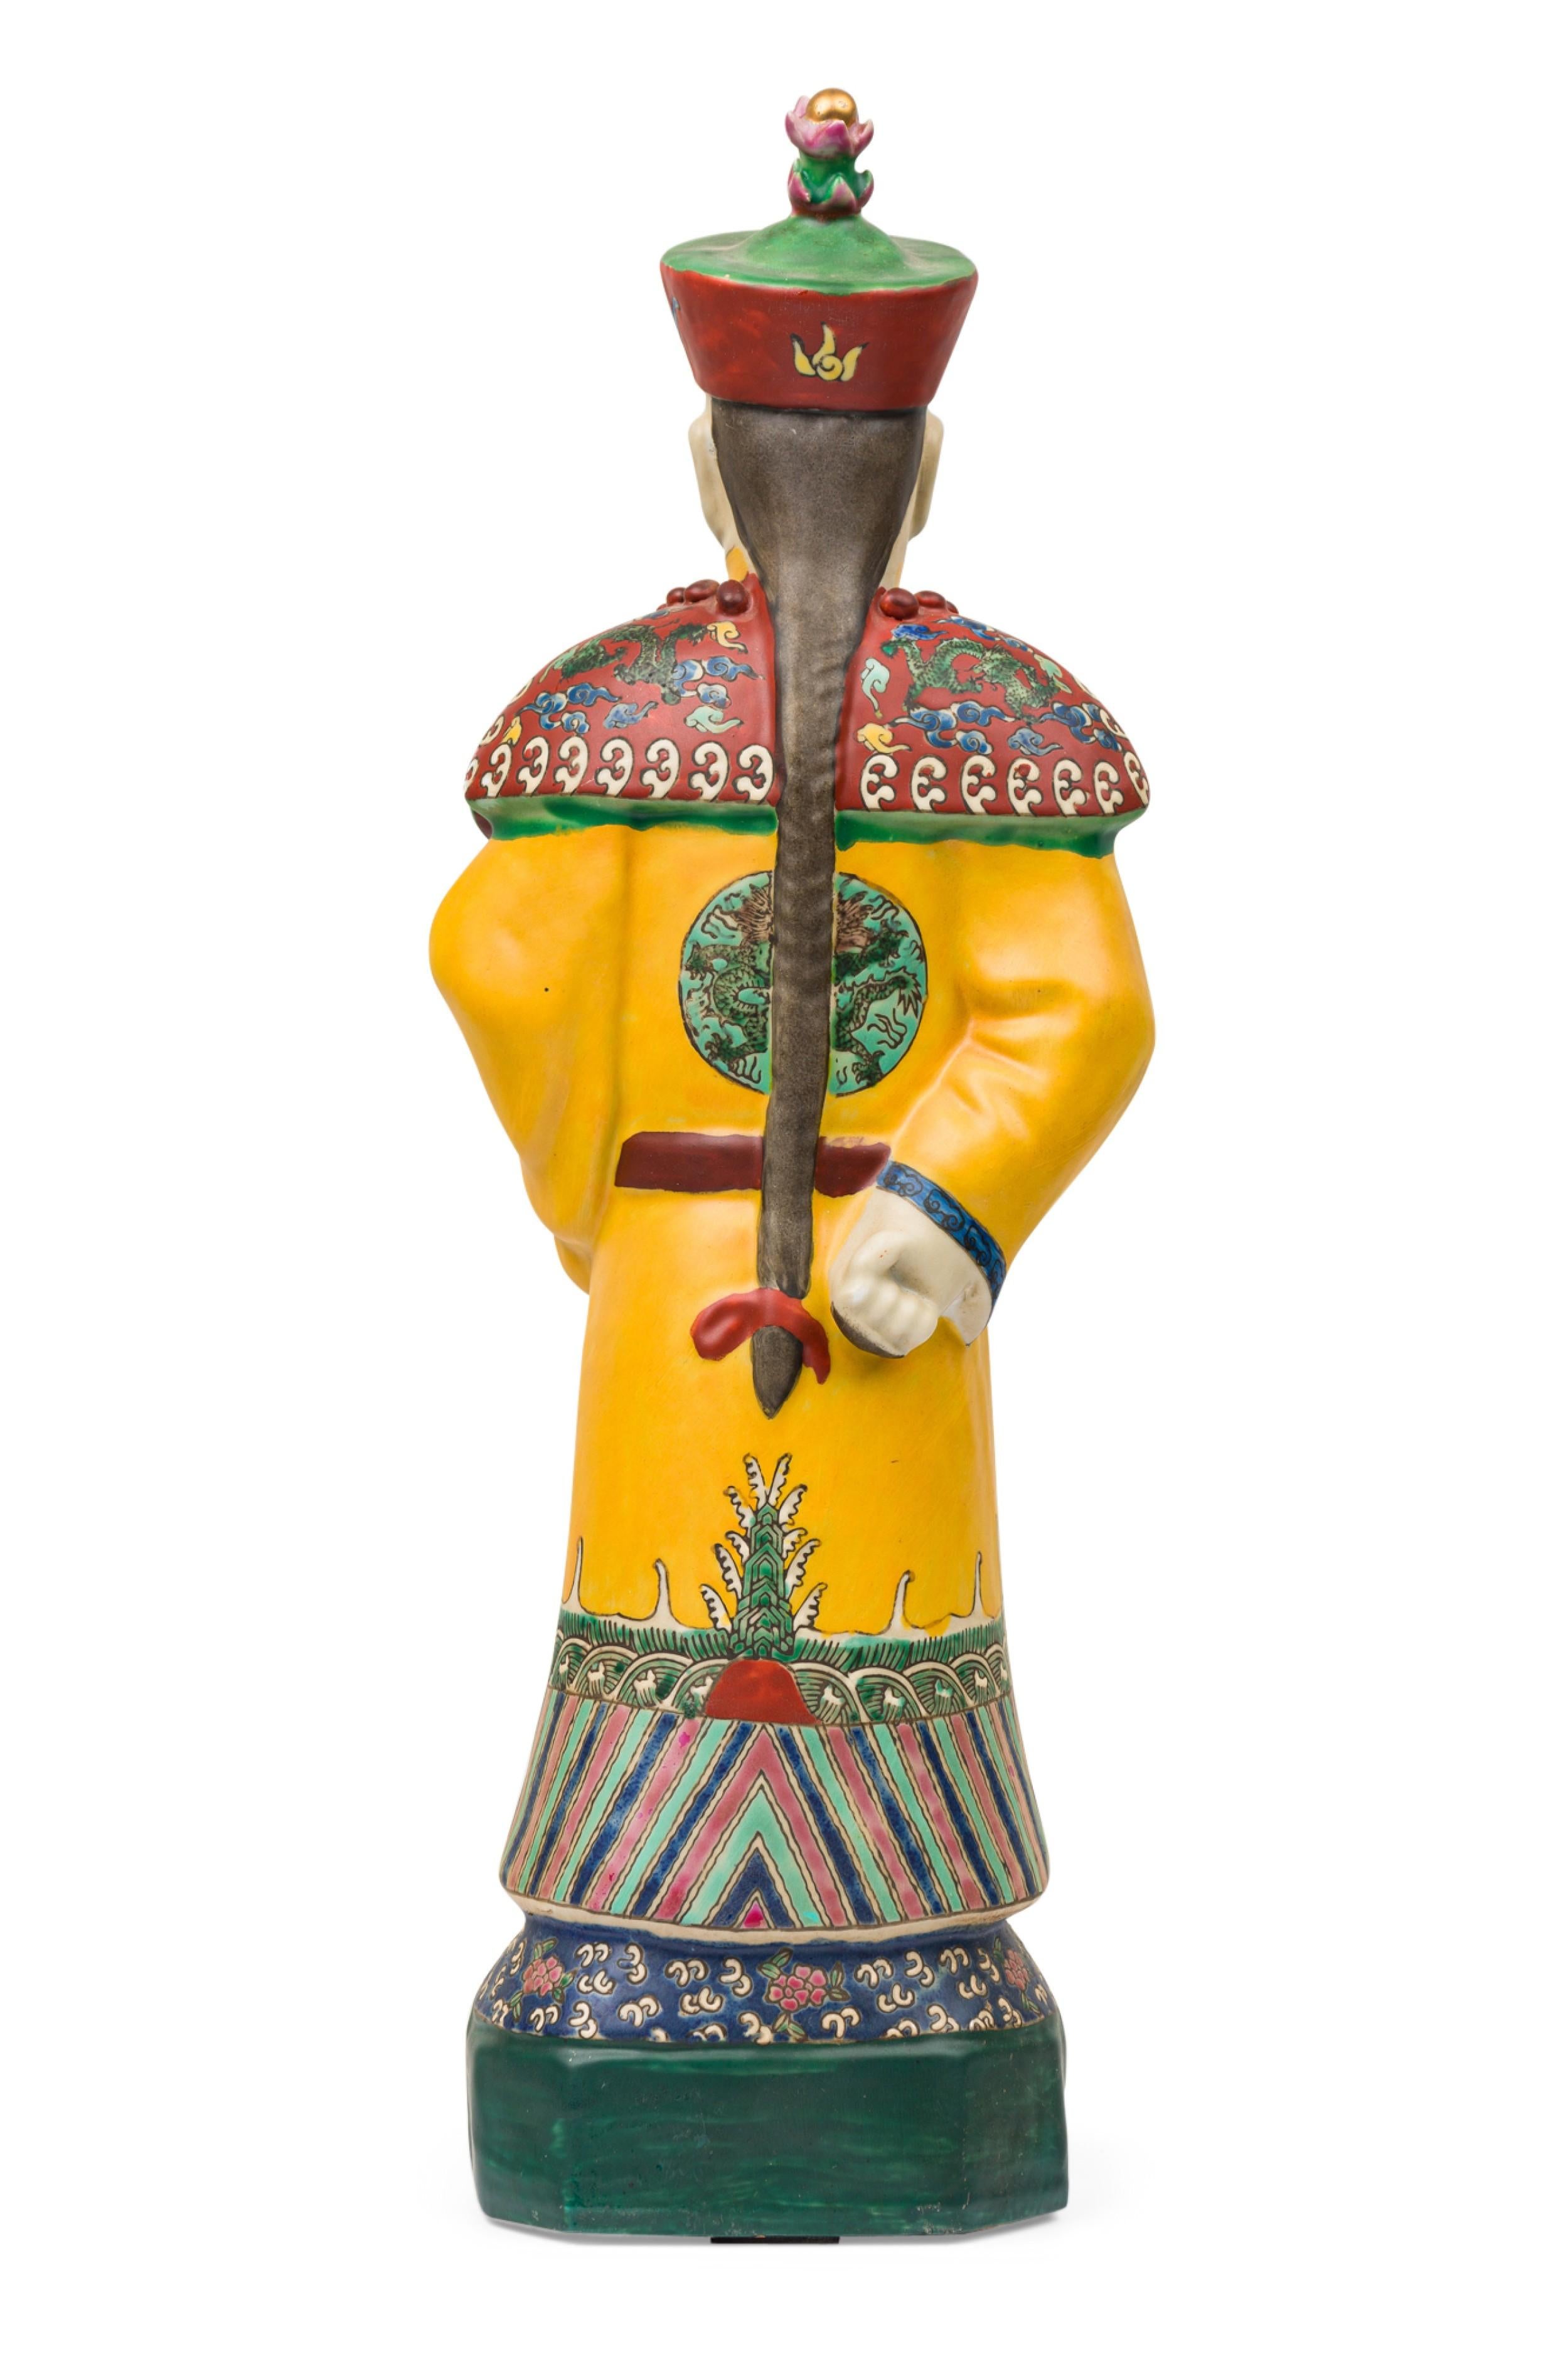 Pair of Chinese Painted Ceramic Figures Depicting a Yellow Robed Emperor For Sale 6